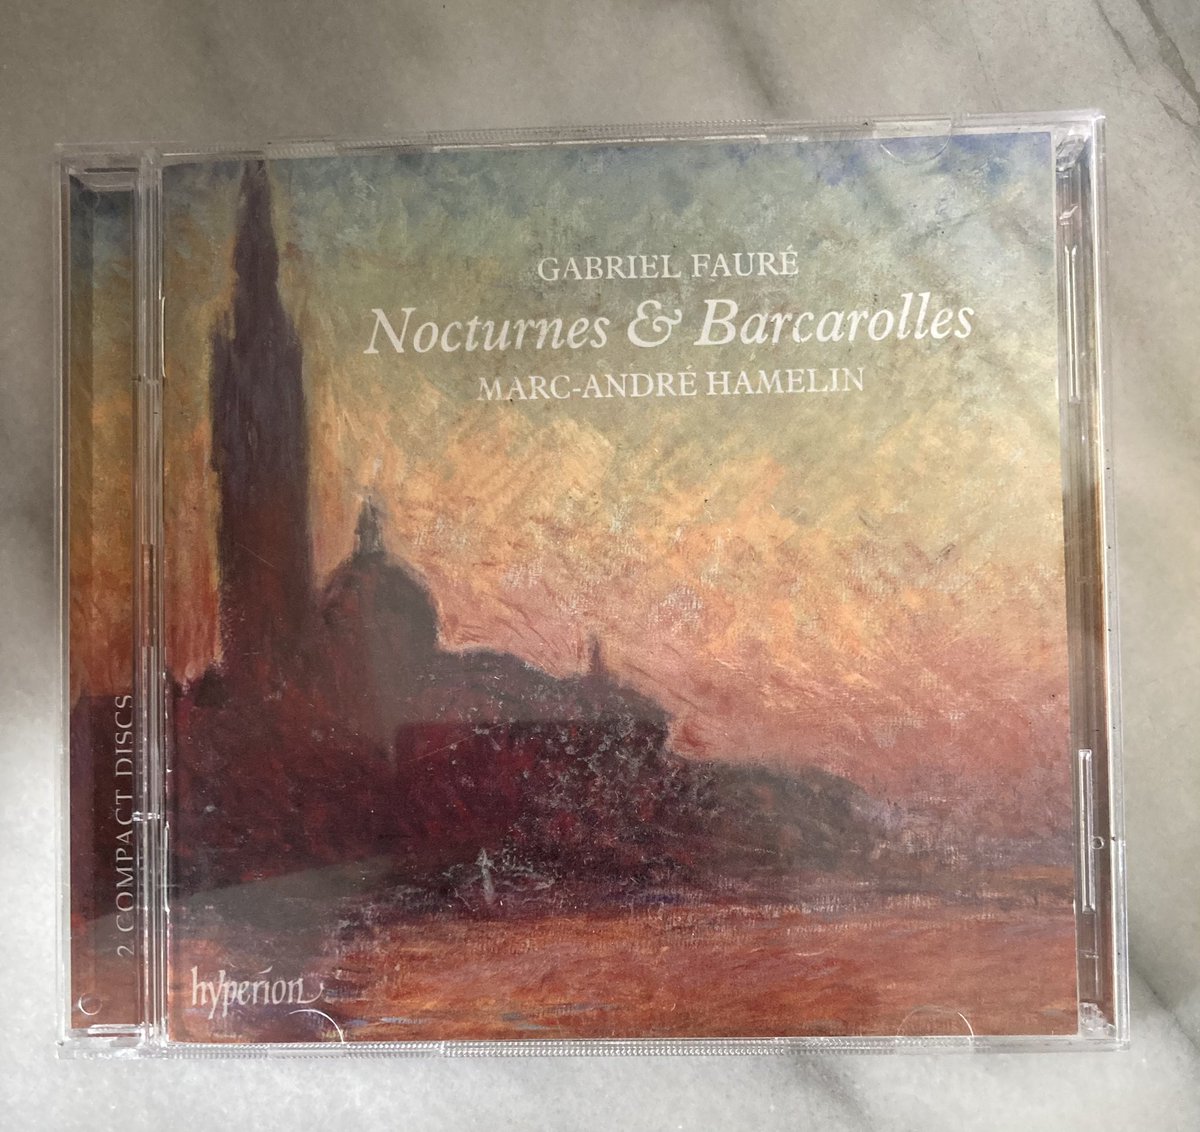 Late to the party here, but this is a superb recording of some of my favourite piano works: #Fauré Nocturnes & Barcarolles by Marc-André Hamelin